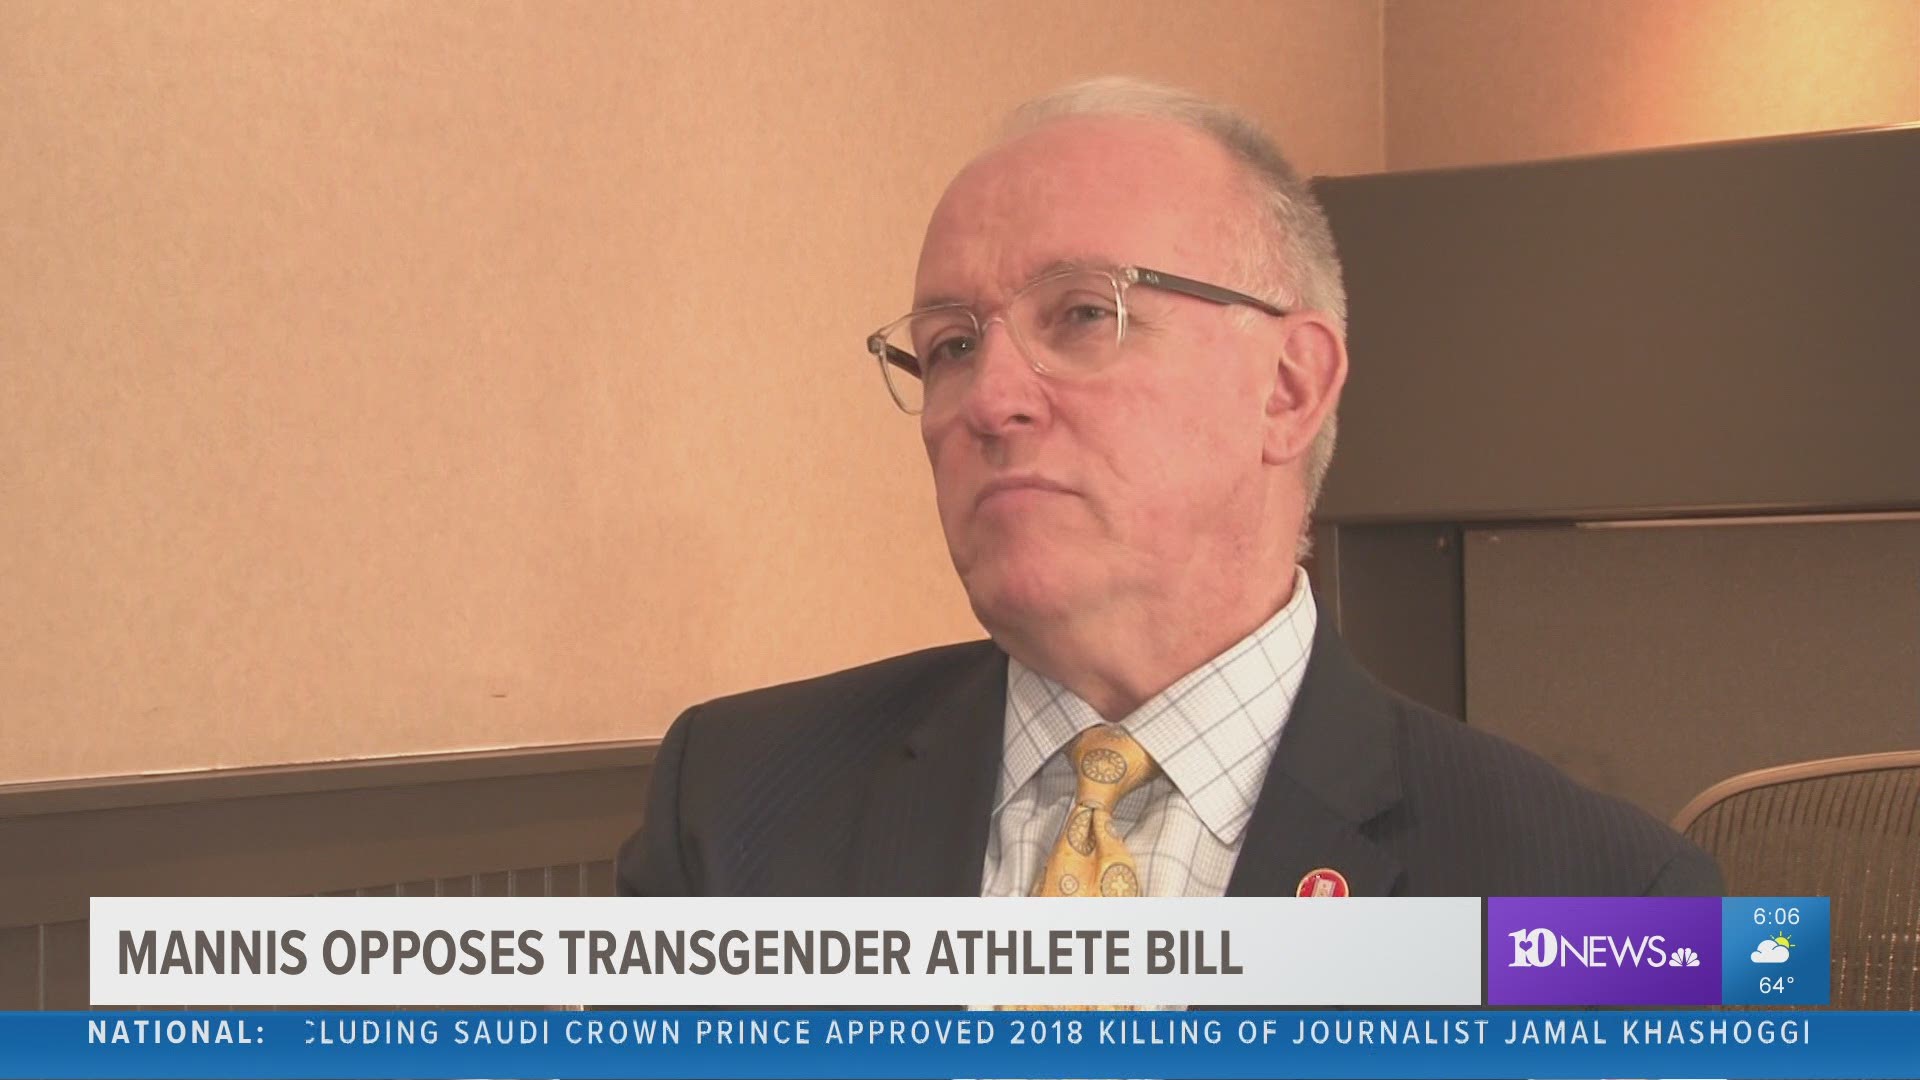 Mannis is asking other lawmakers in Nashville to re-consider a bill that would prevent transgender athletes from playing with teams aligned to their gender identity.